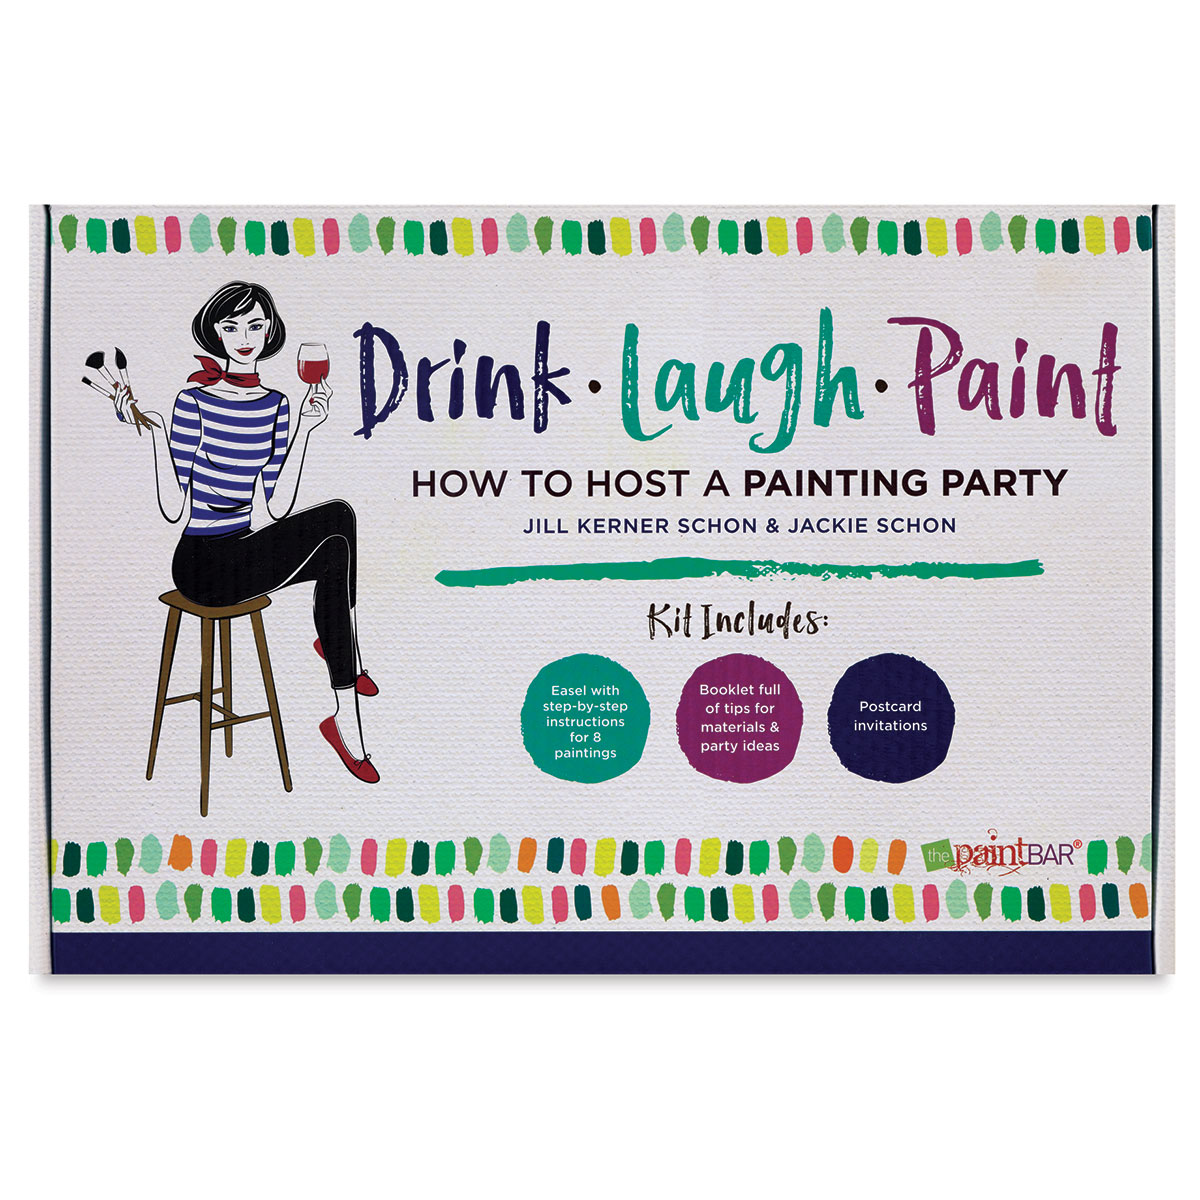 Drink Laugh Paint: How To Host A Painting Party [Book]